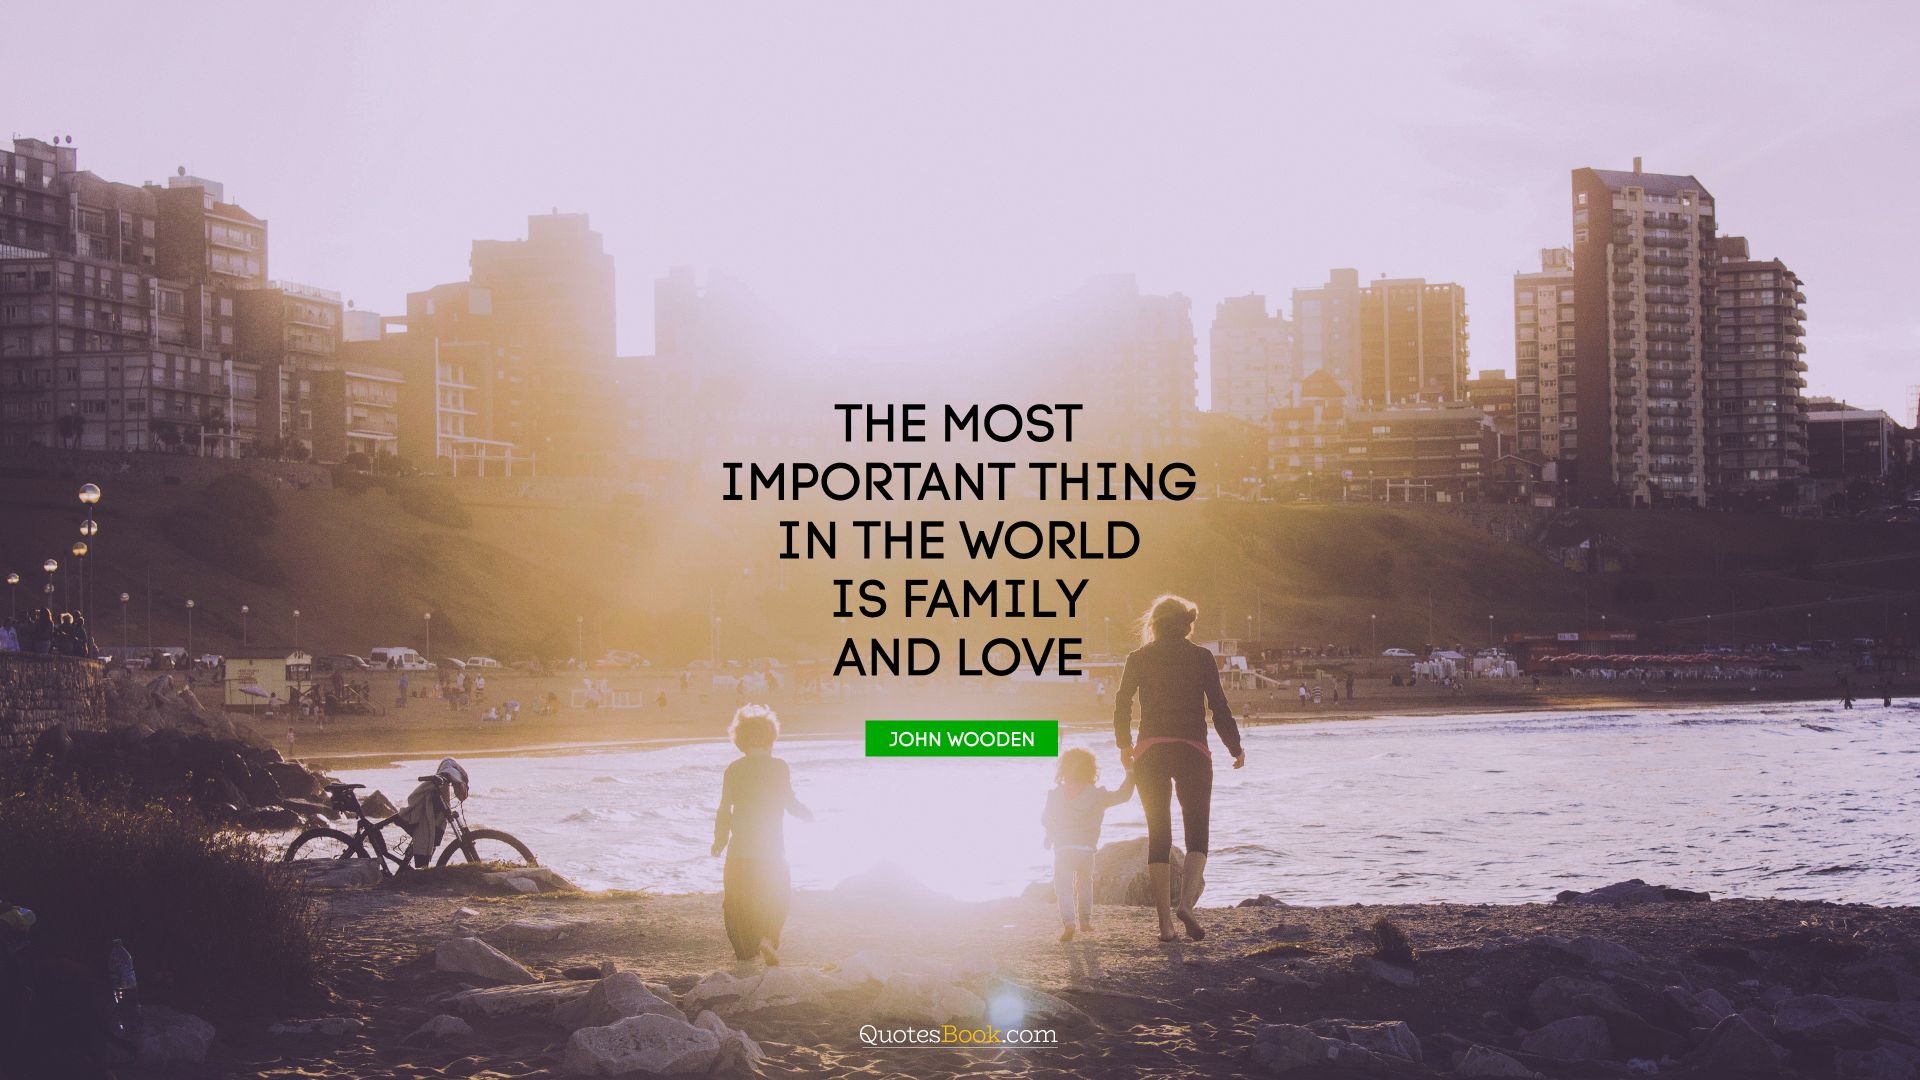 The most important thing in the world is family and love. - Quote by John Wooden